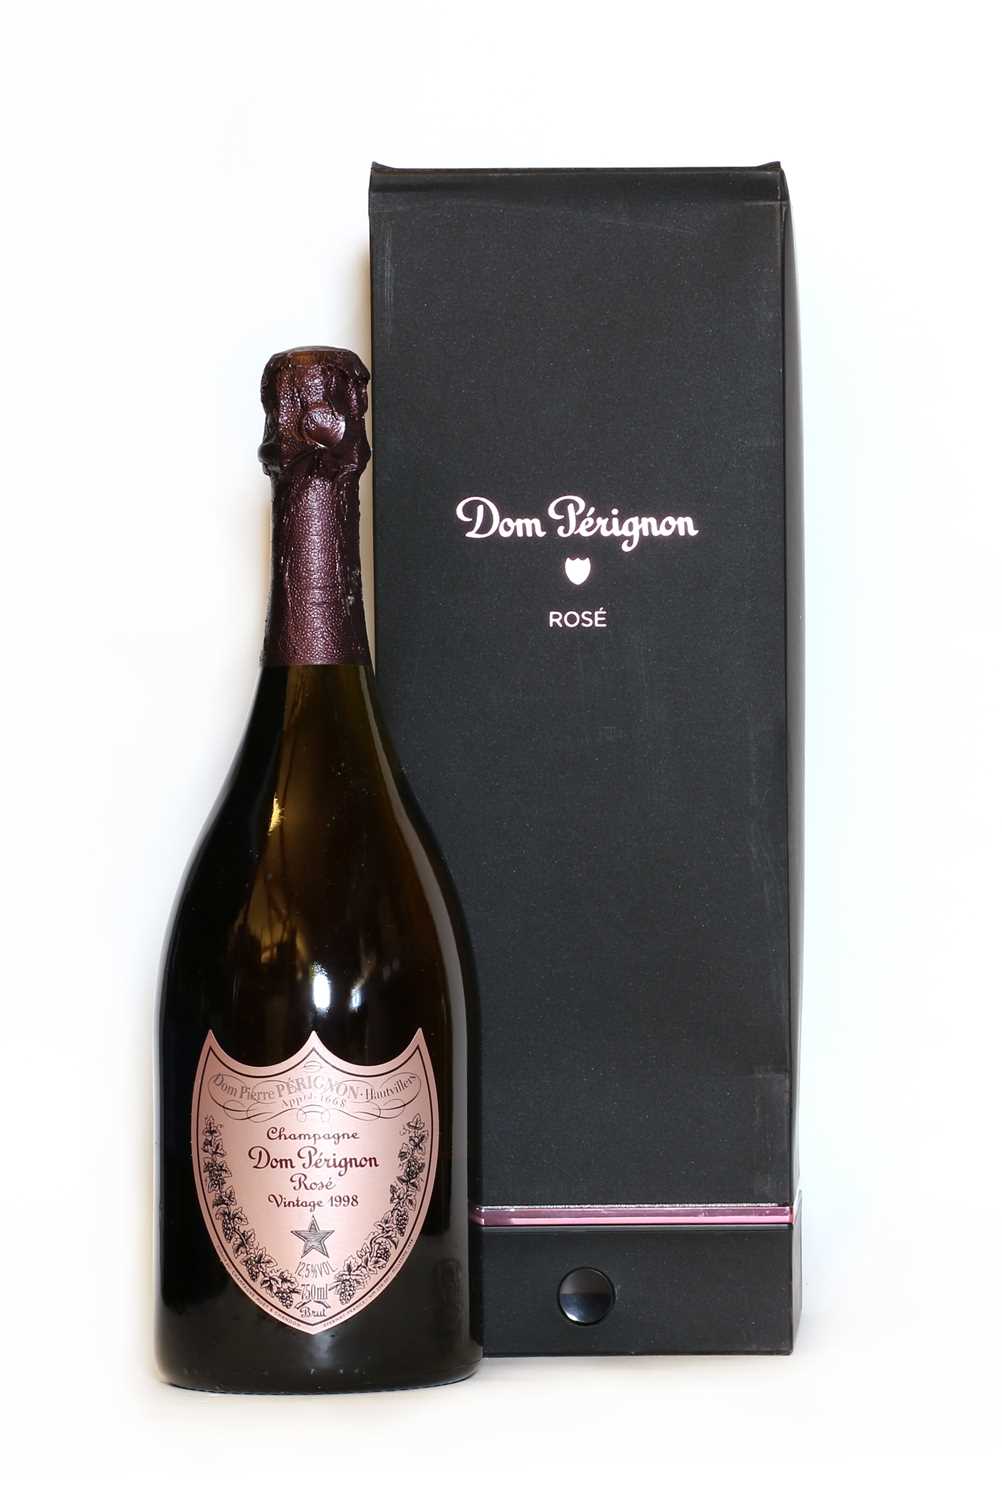 Lot 26 - Moet & Chandon, Epernay, Dom Perignon rose, 1998, boxed (1)